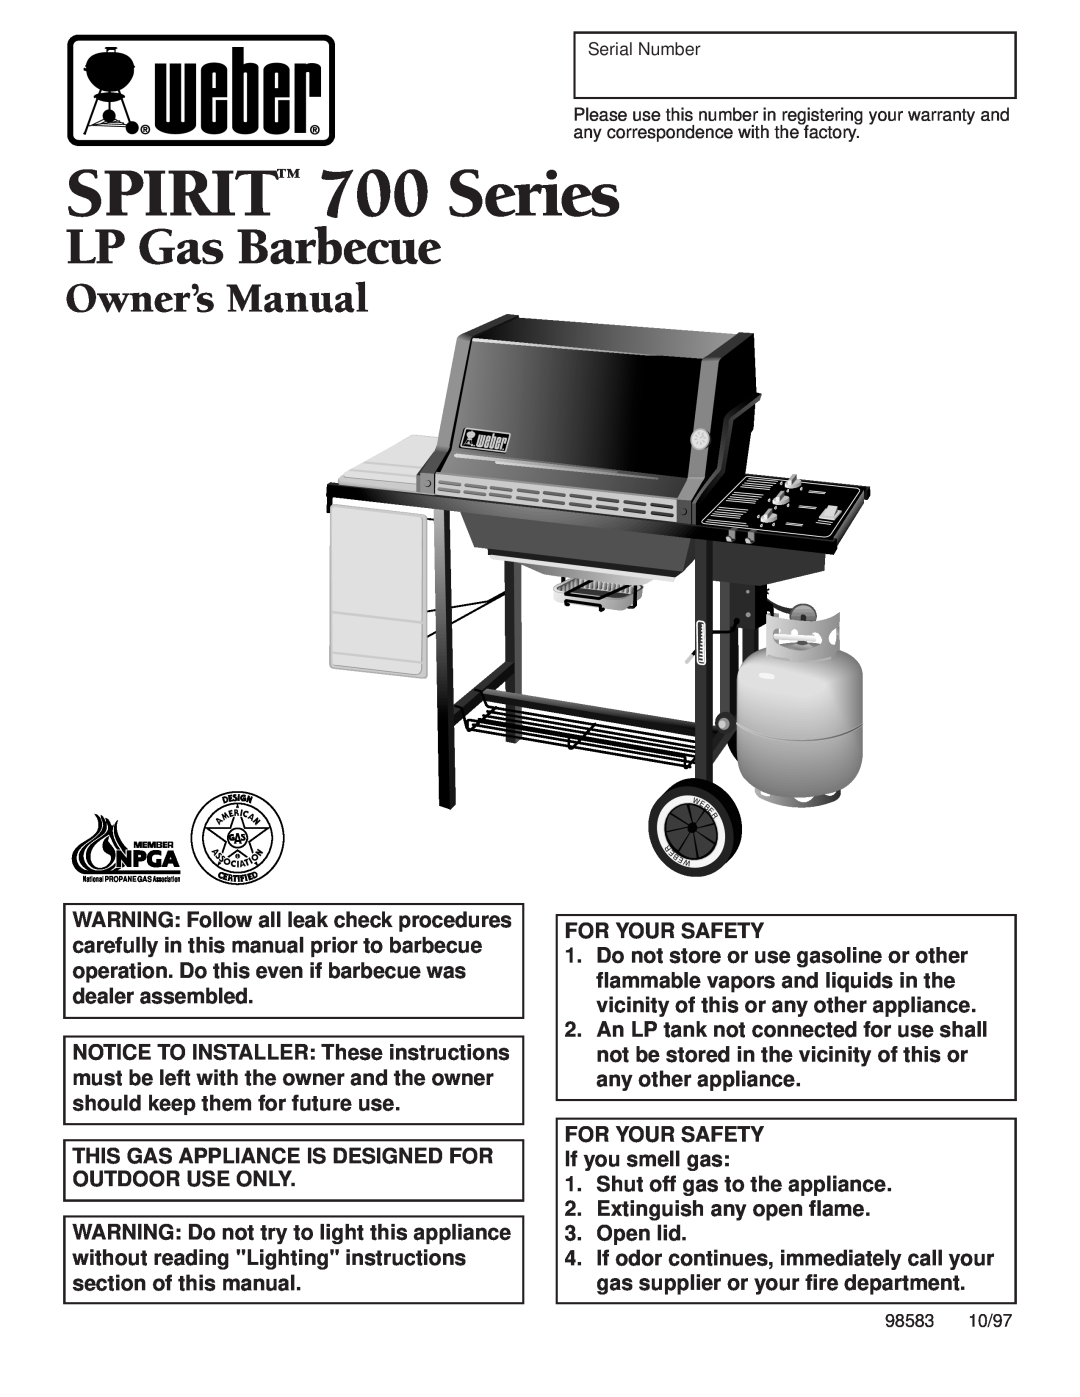 Weber 98583 owner manual SPIRIT 700 Series, LP Gas Barbecue, For Your Safety, FOR YOUR SAFETY If you smell gas 